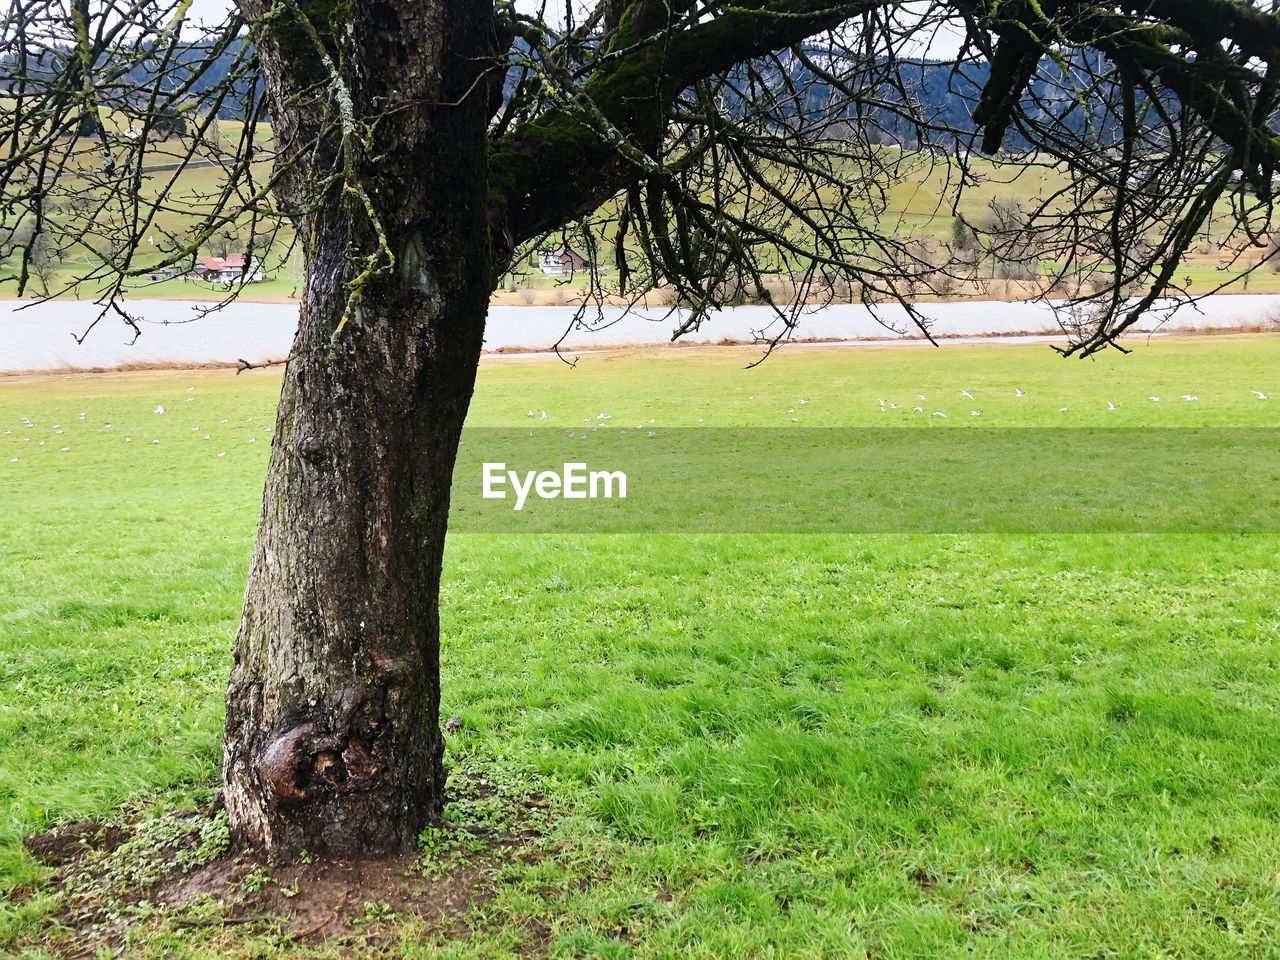 VIEW OF TREE ON FIELD